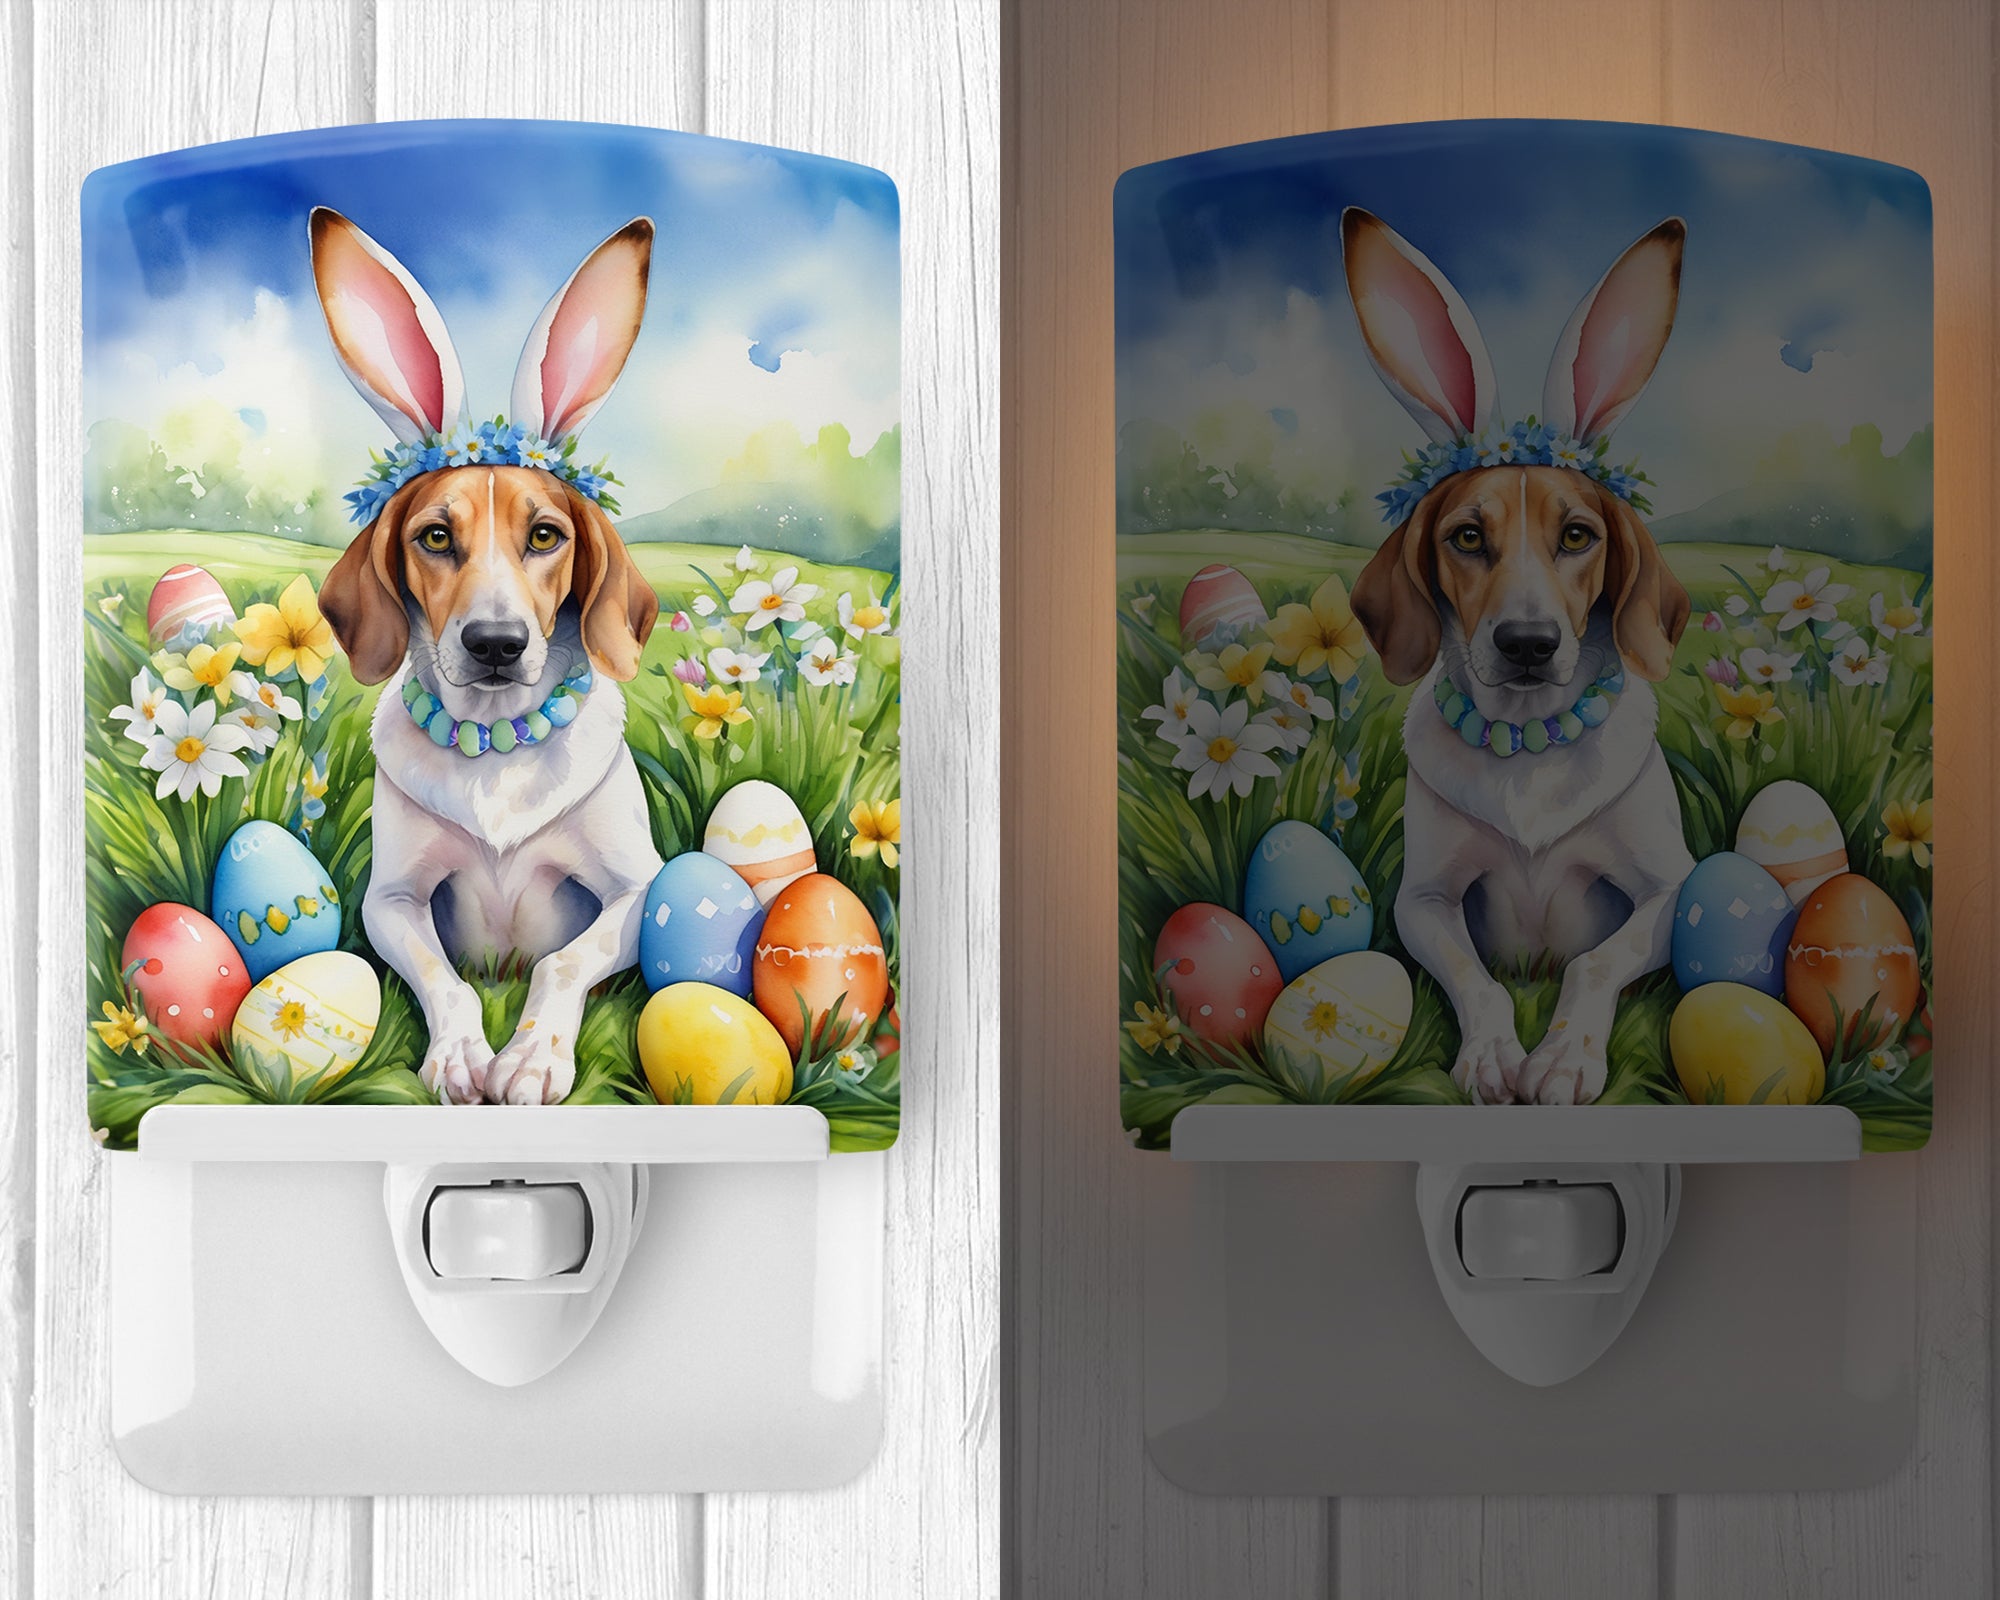 Buy this American Foxhound Easter Egg Hunt Ceramic Night Light